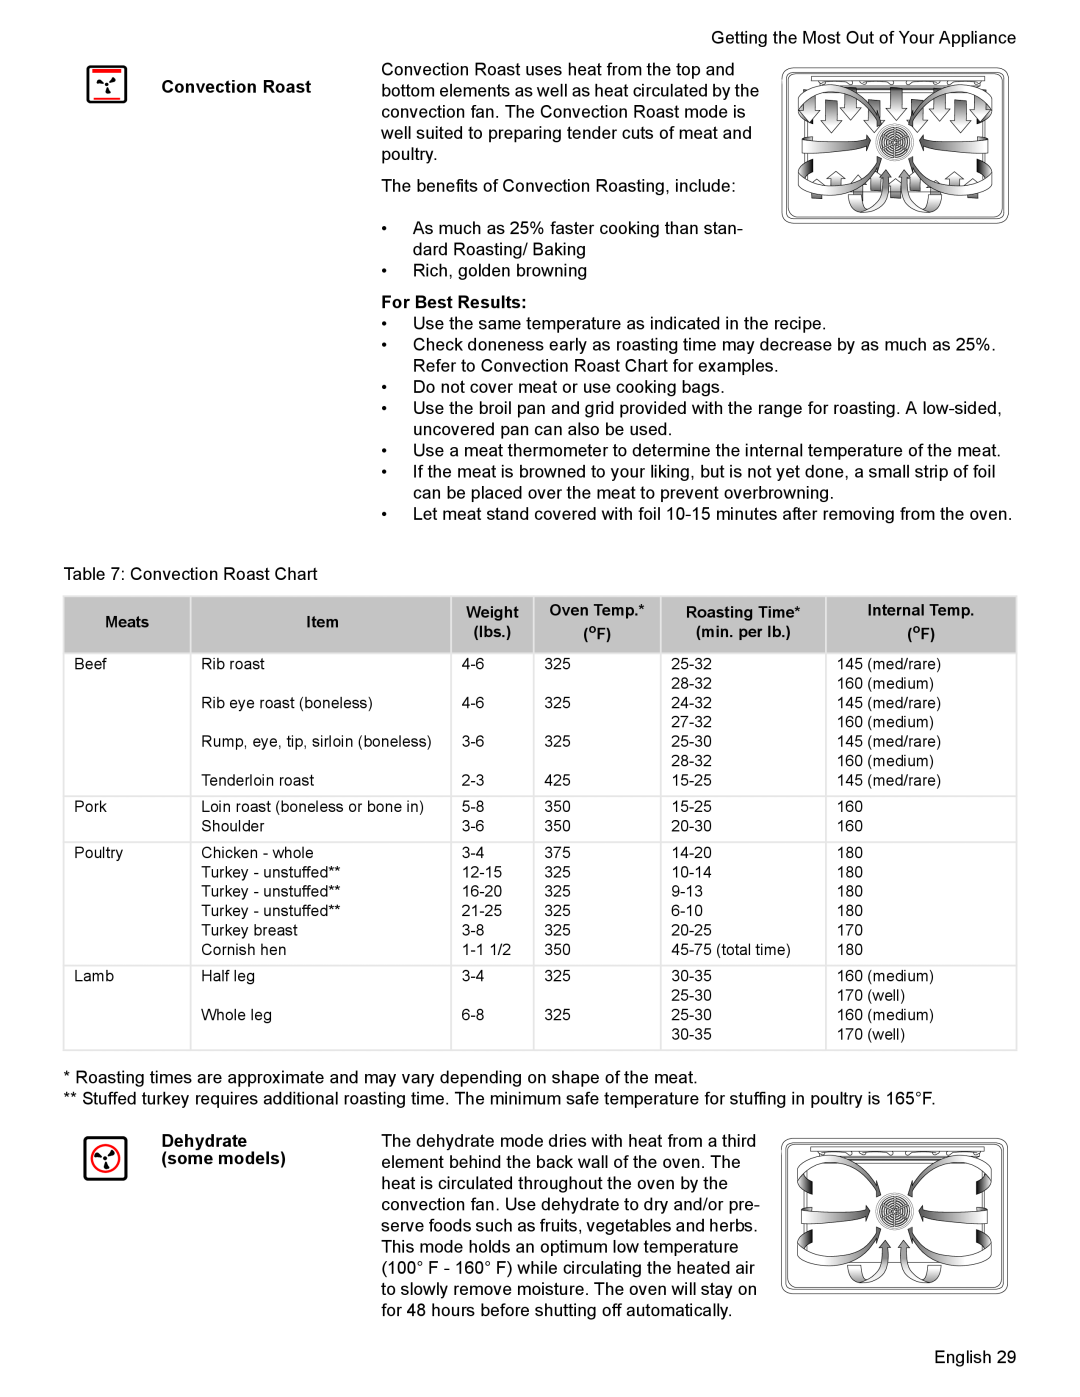 Bosch Appliances HES7282U manual For Best Results, Dehydrate some models 